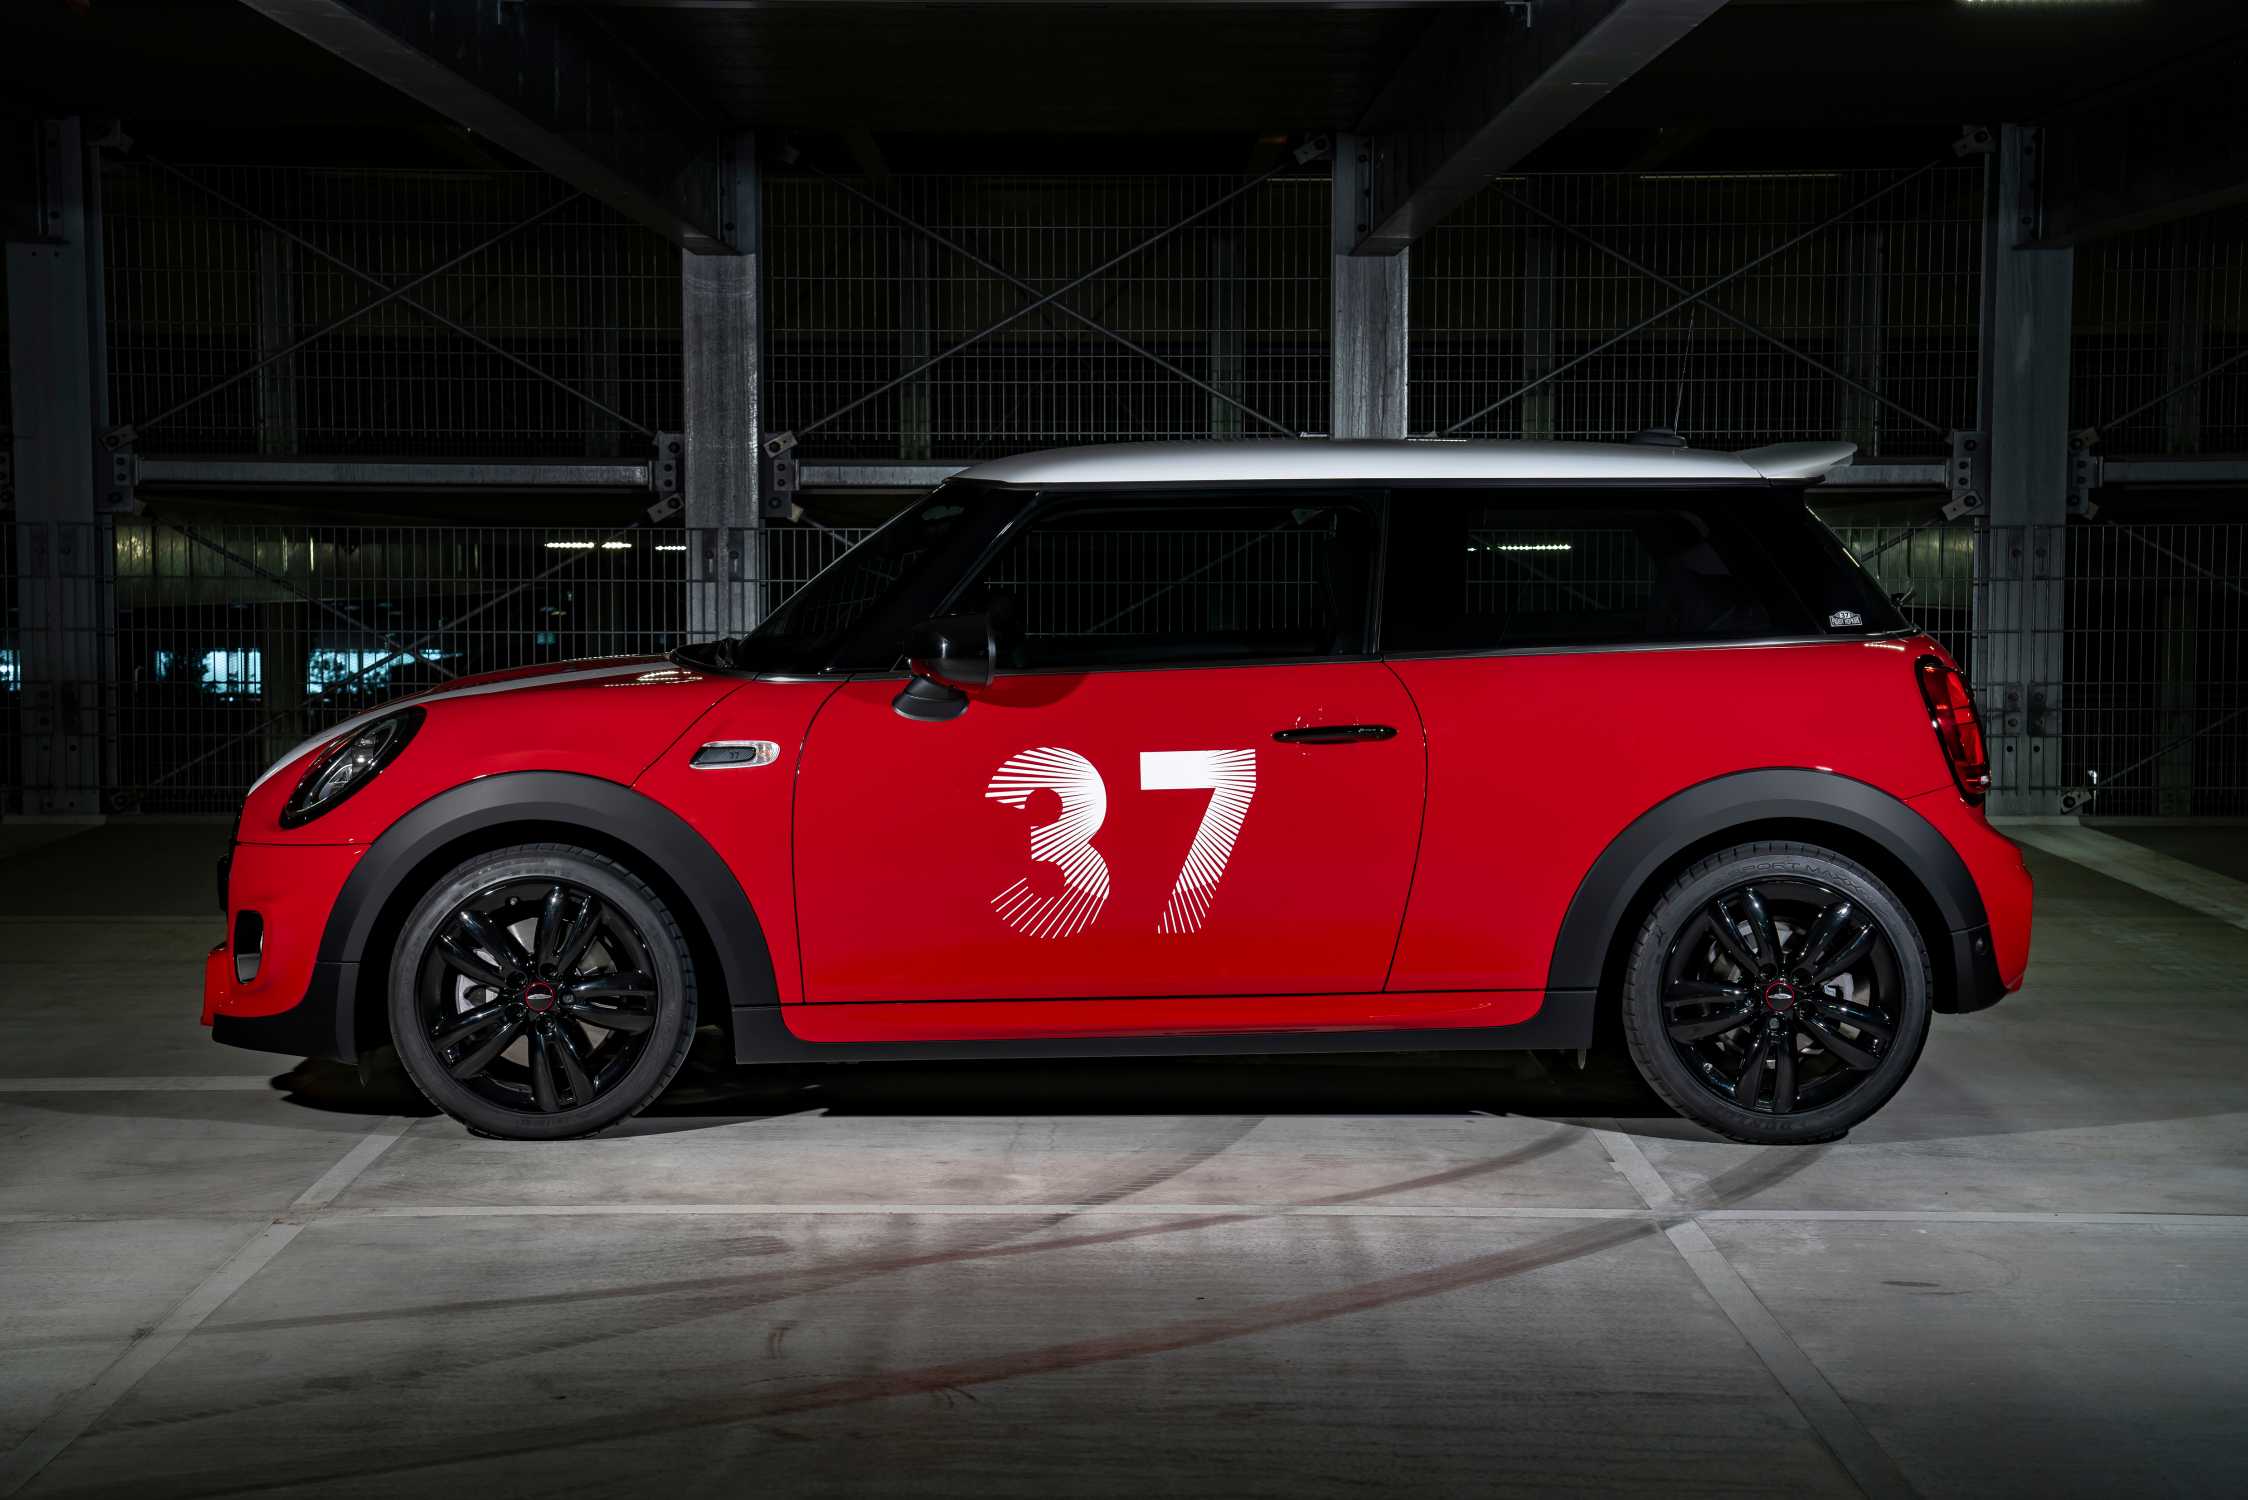 NUMBER 37 IS BACK ON THE STARTING LINE: THE MINI PADDY HOPKIRK EDITION